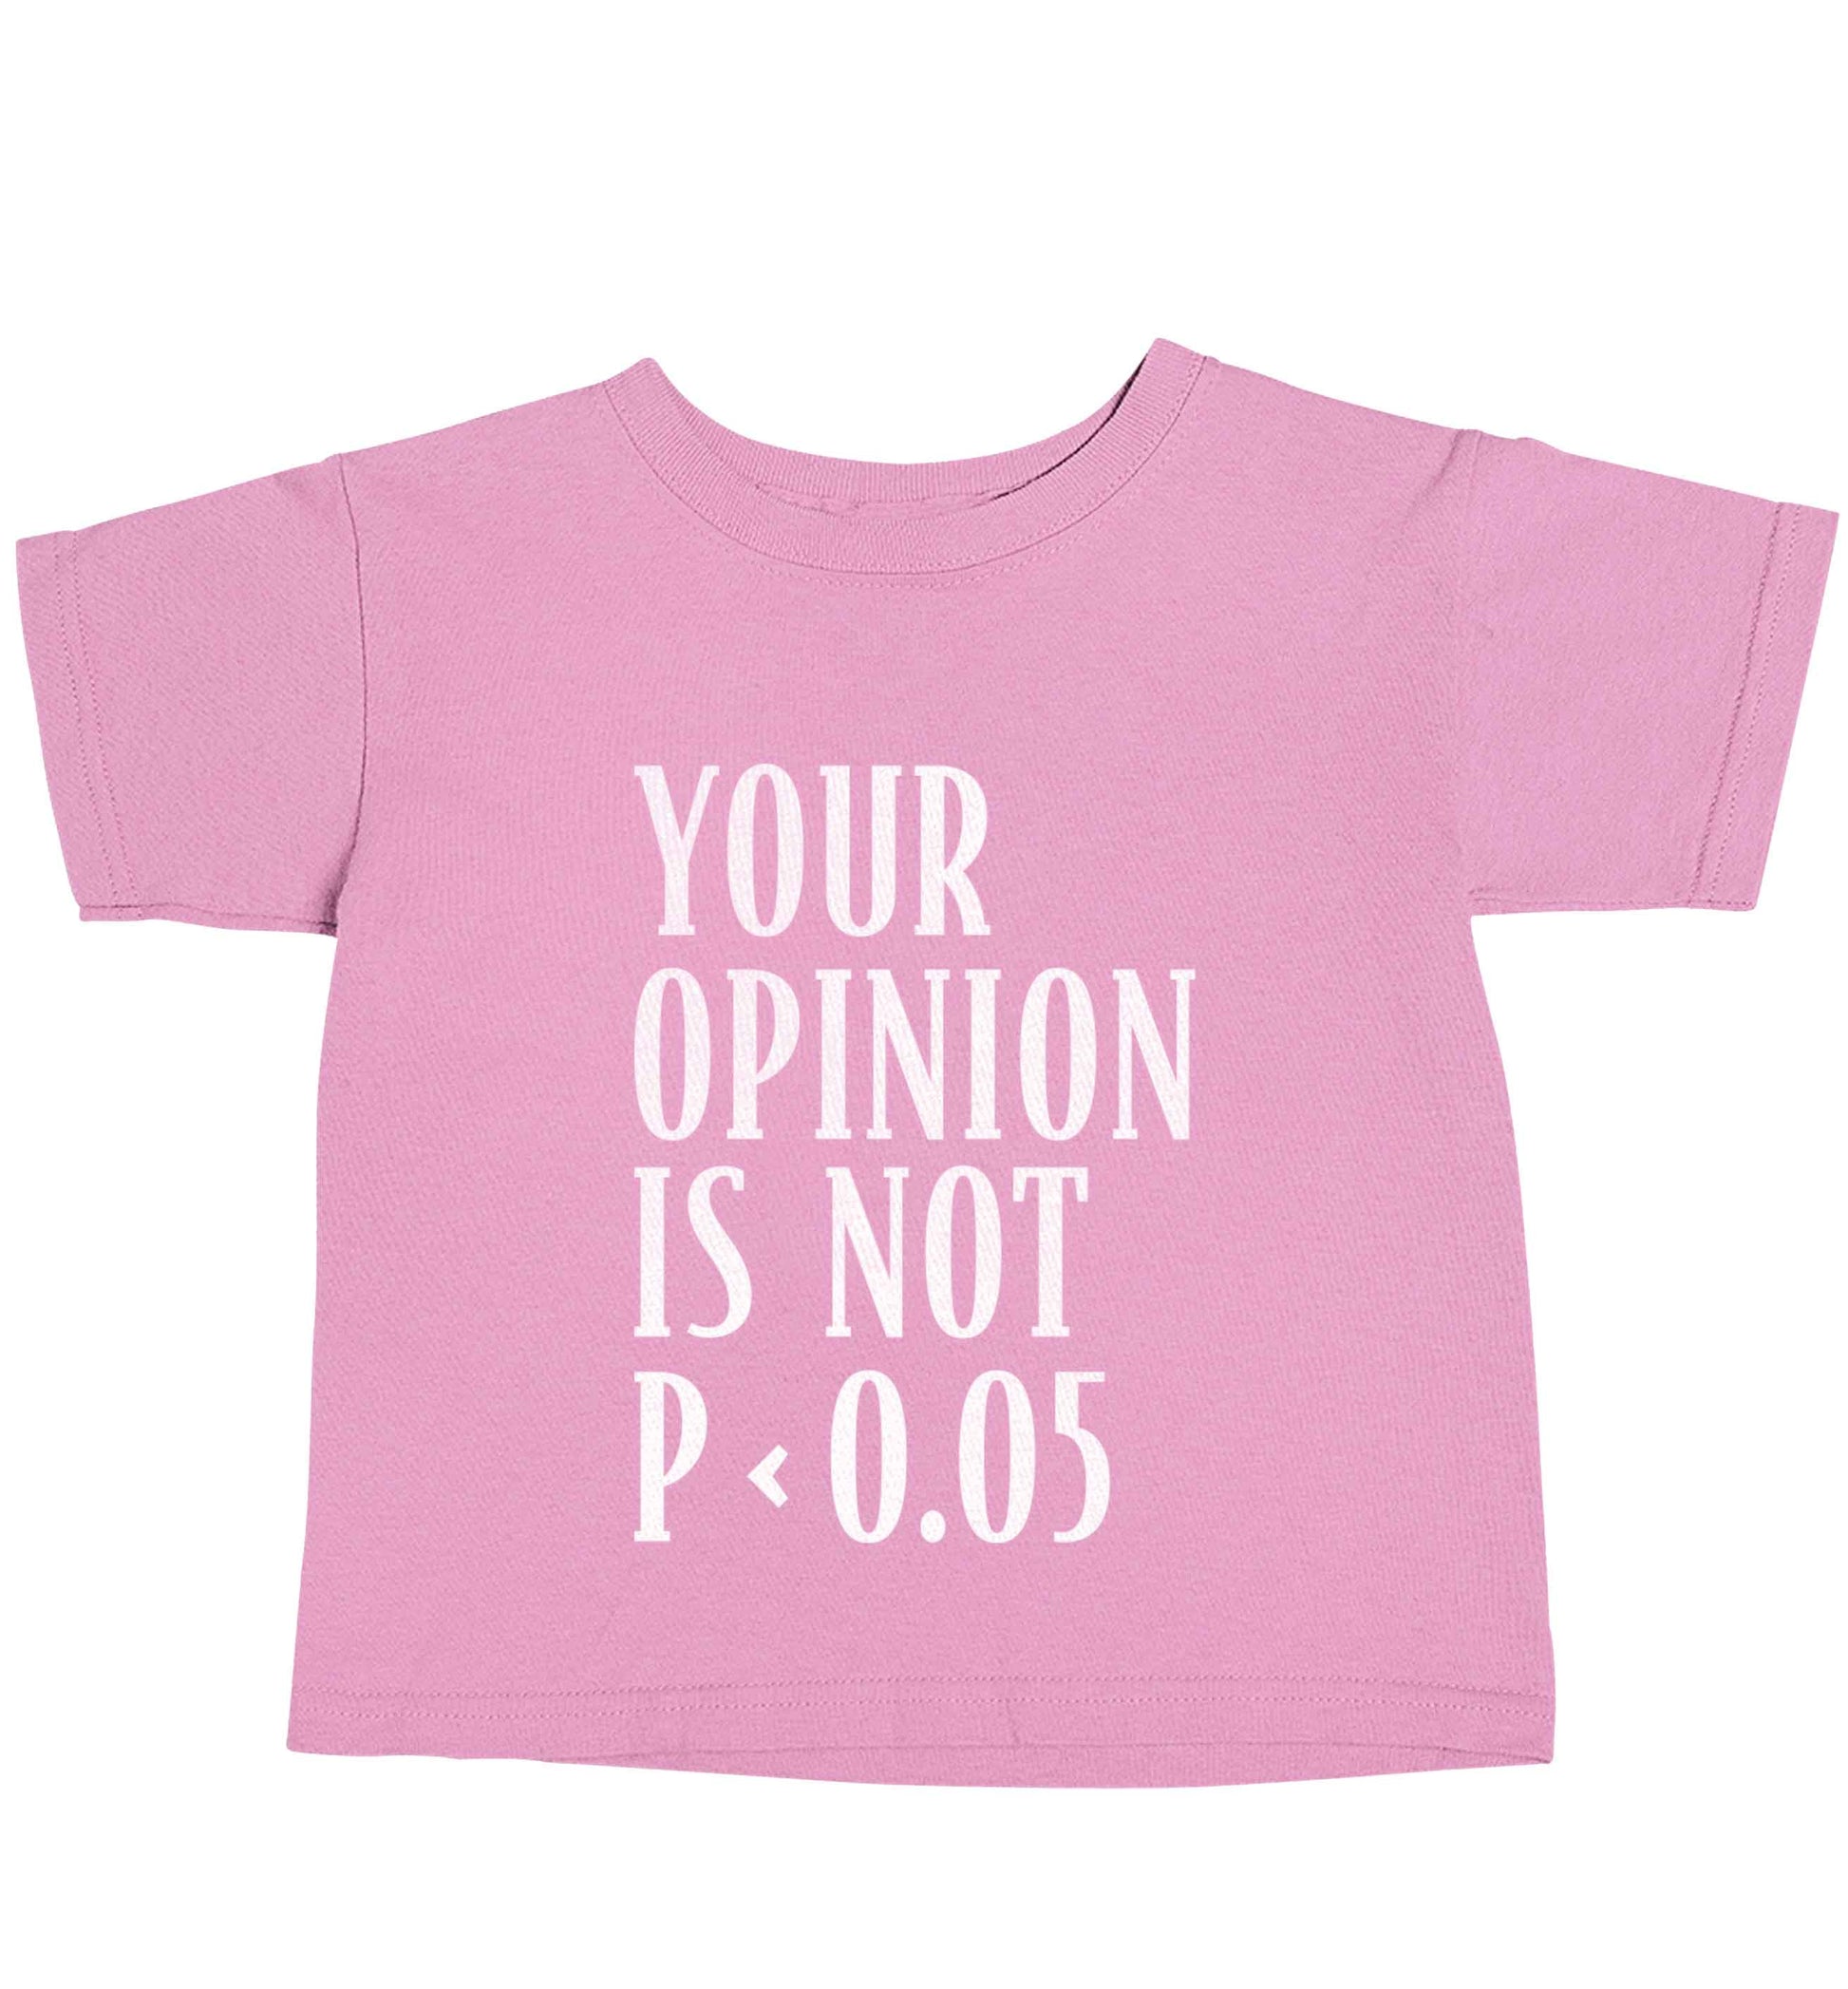 Your opinion is not P < 0.05light pink baby toddler Tshirt 2 Years